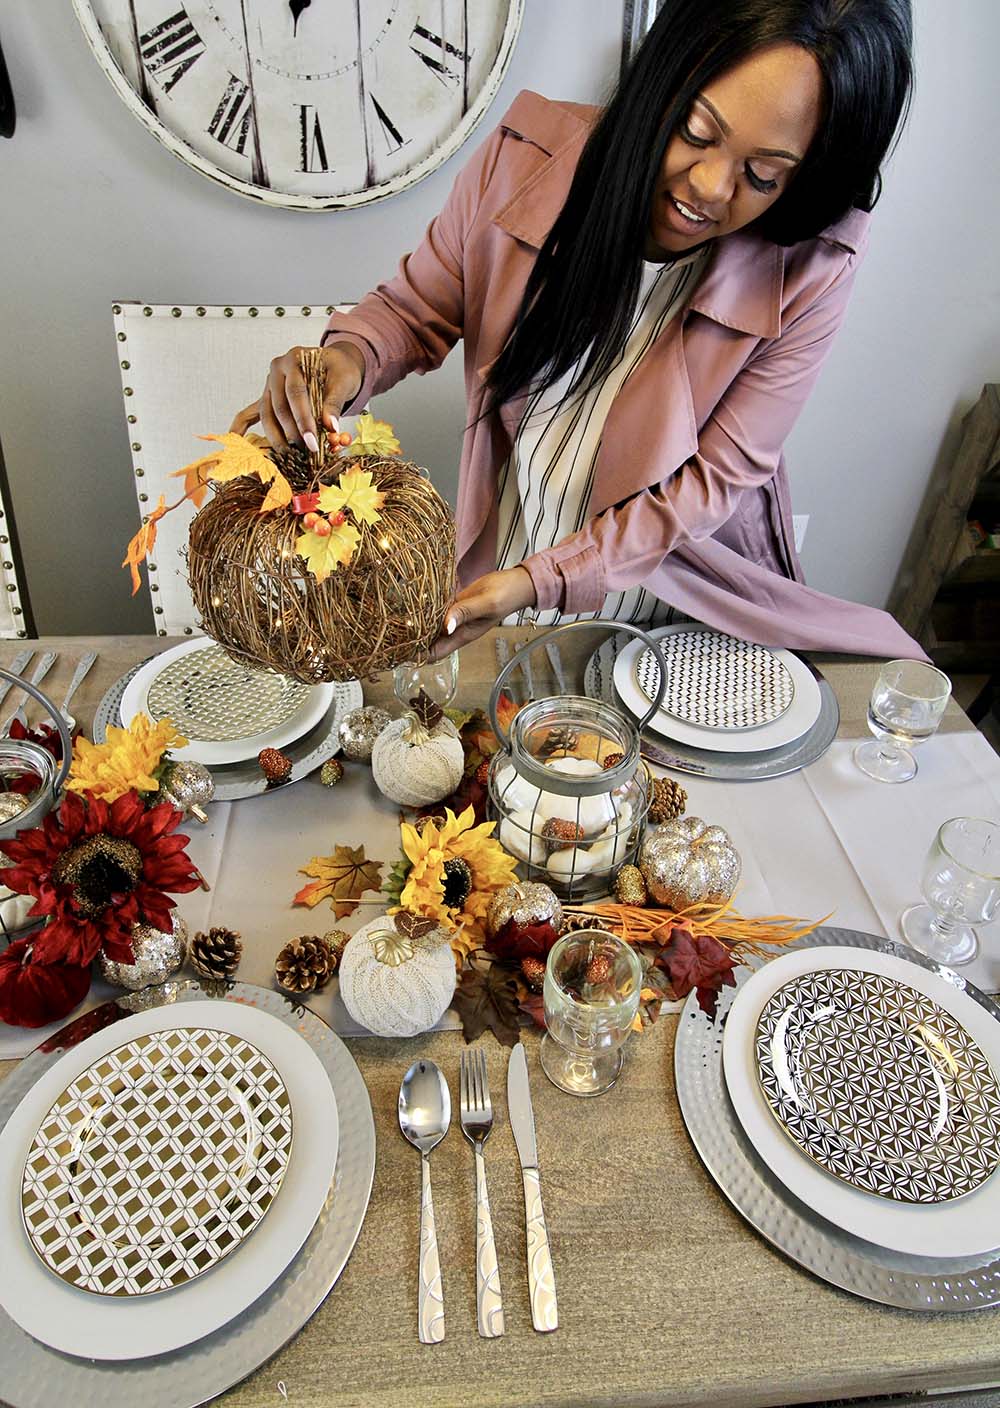 A woman adds a harvest twig pumpkin to the center of a table.